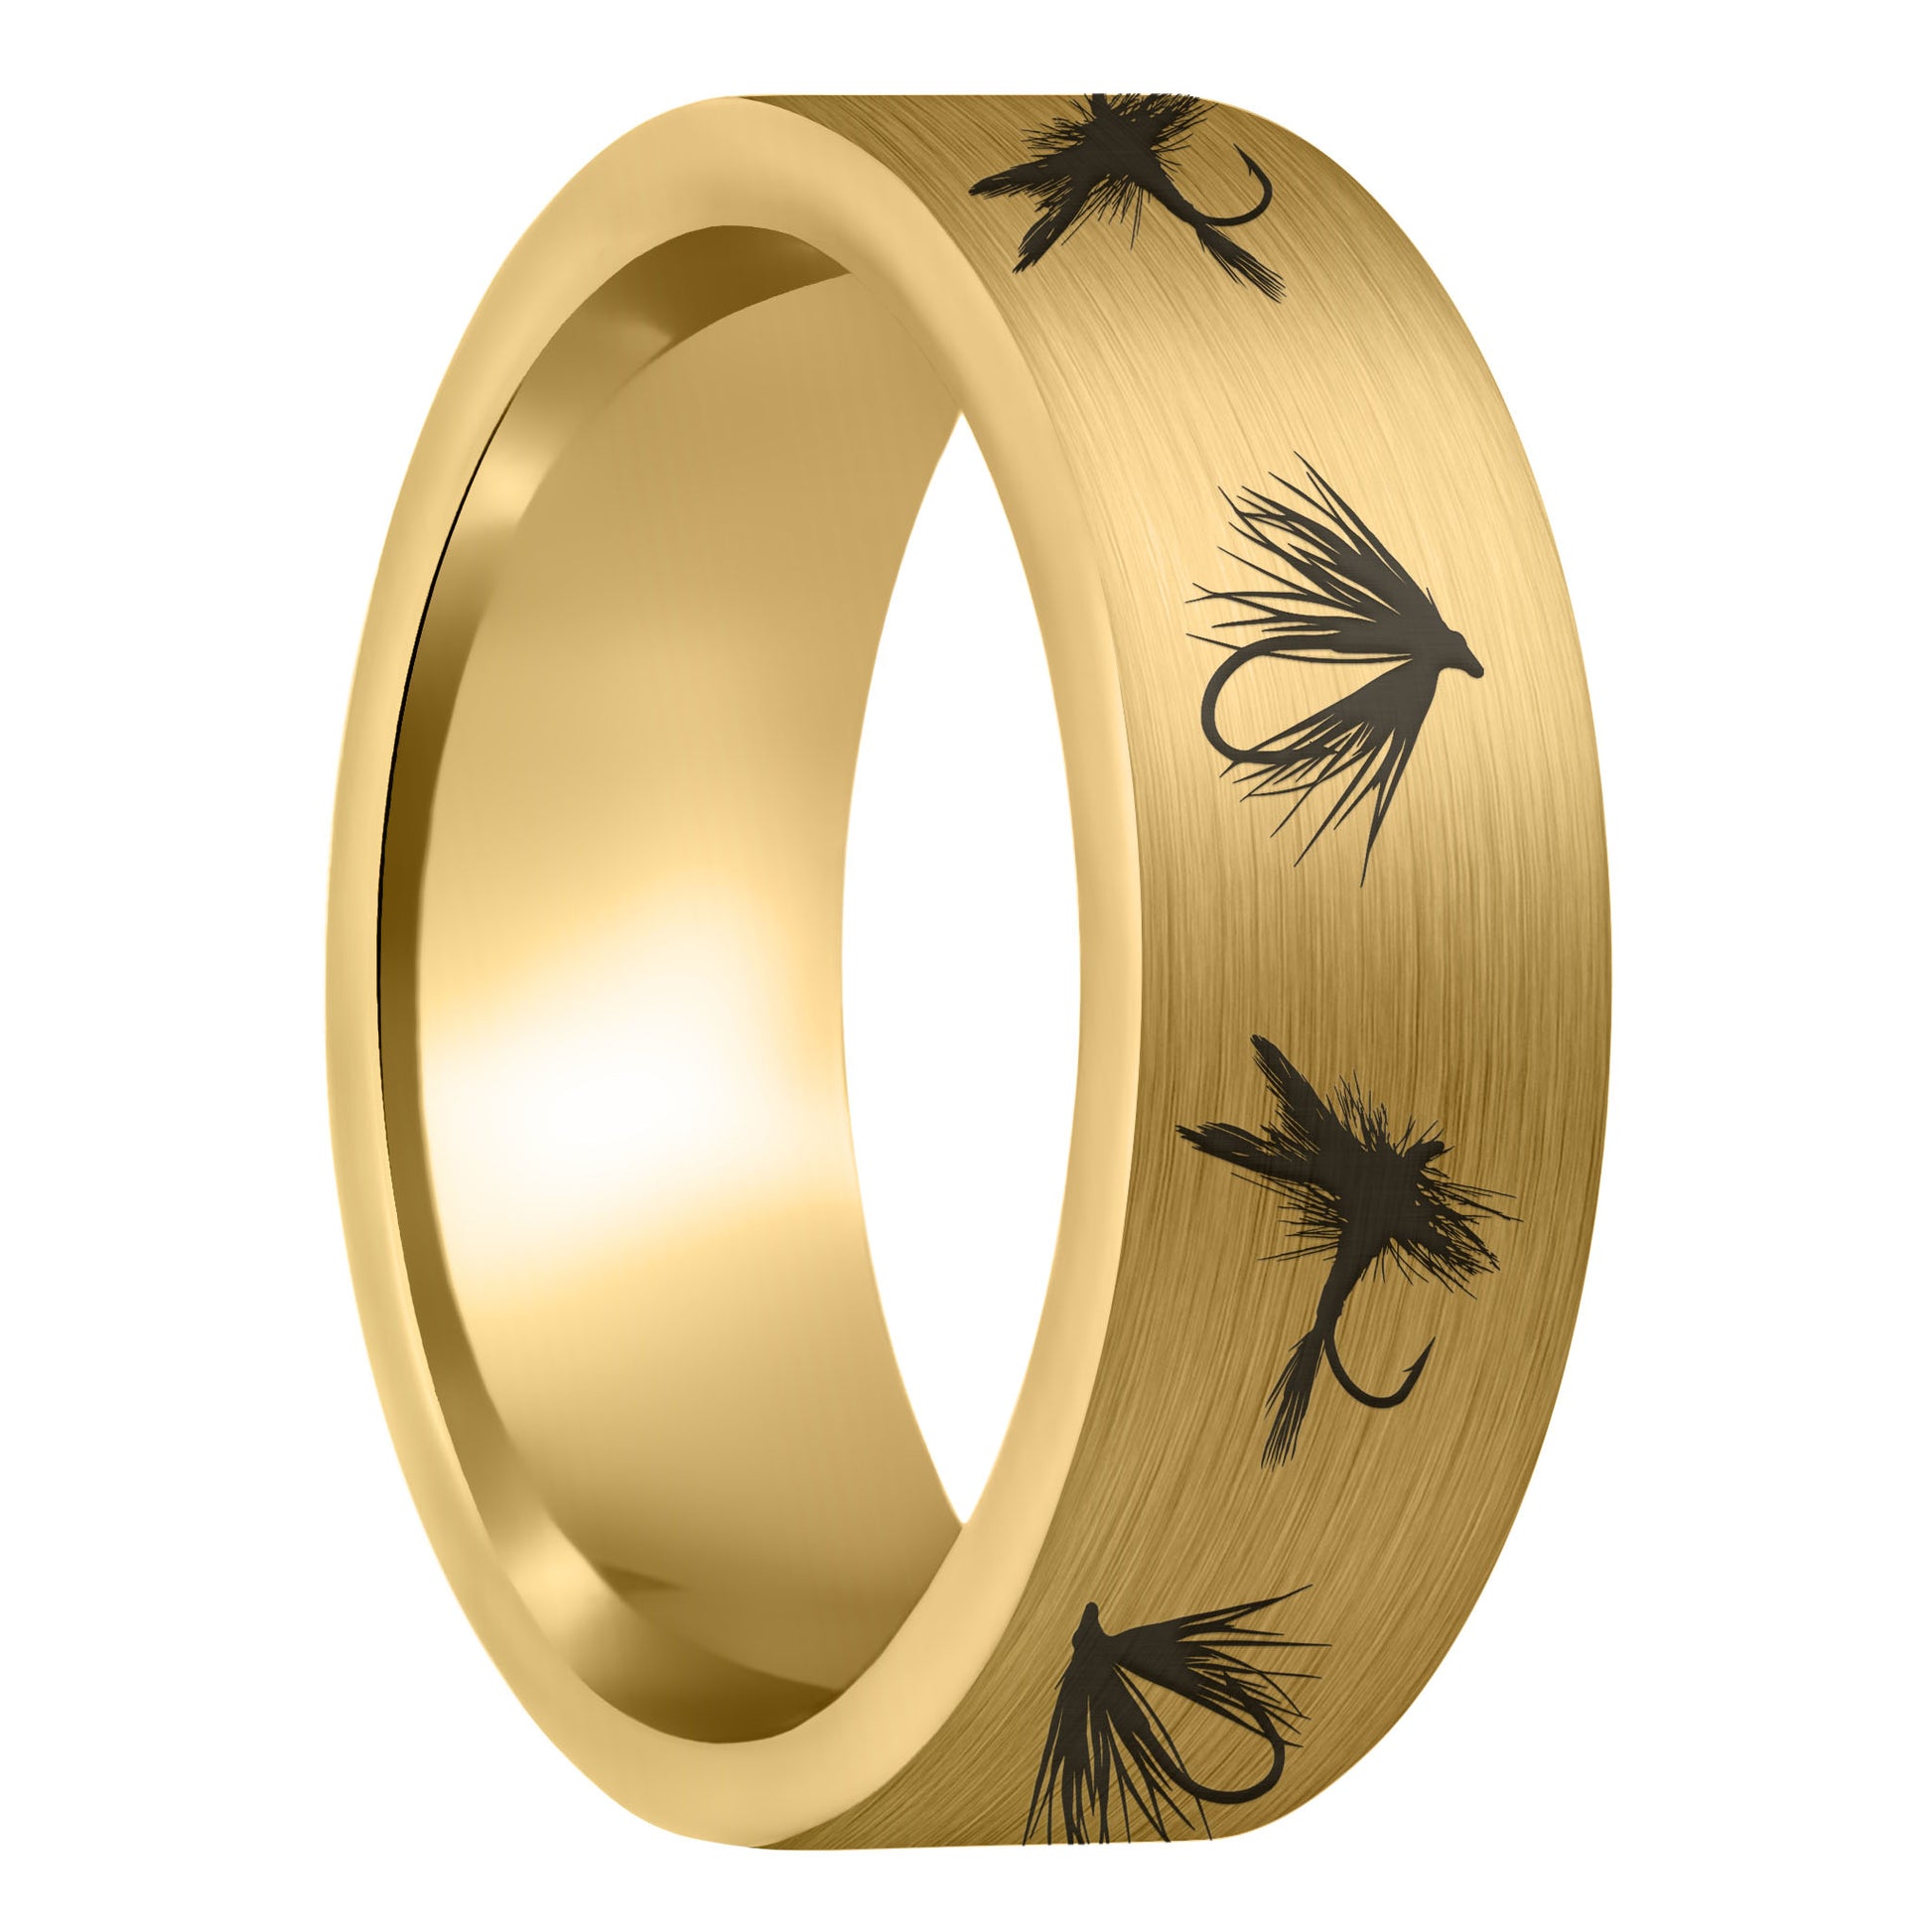 A fly fishing lures brushed gold tungsten men's wedding band displayed on a plain white background.